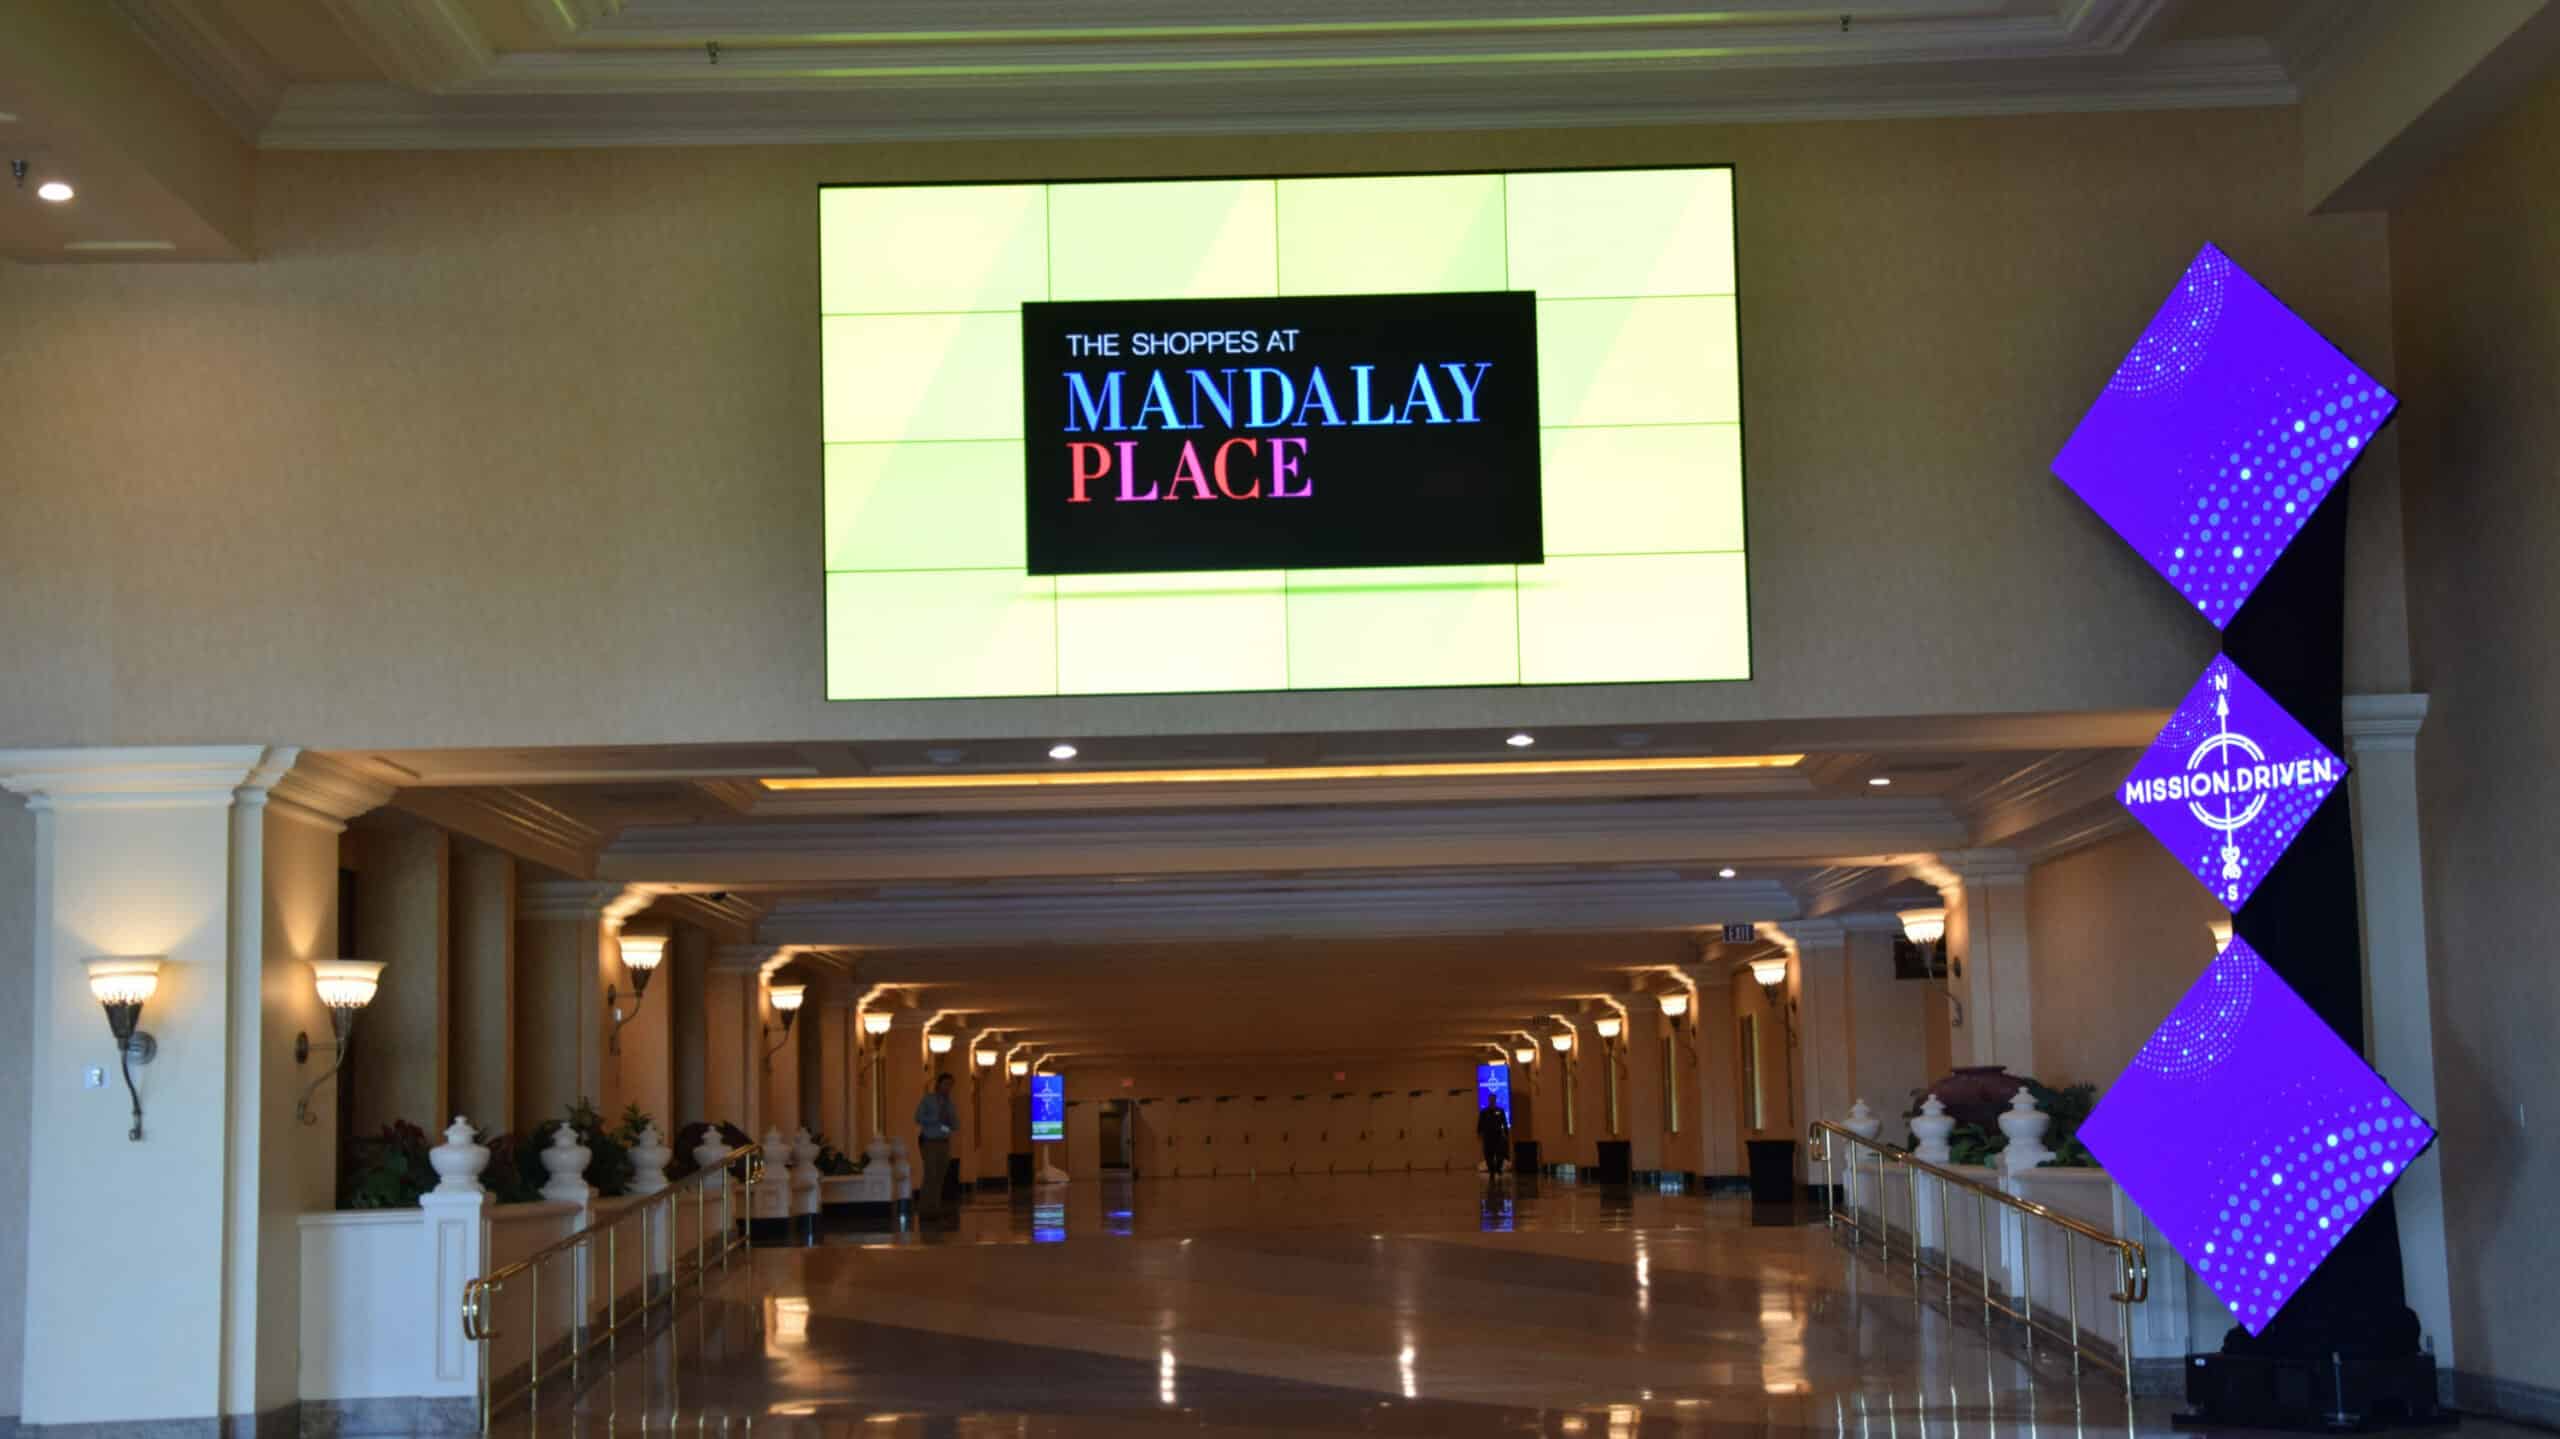 the entrance to The Shoppes at Mandalay Place